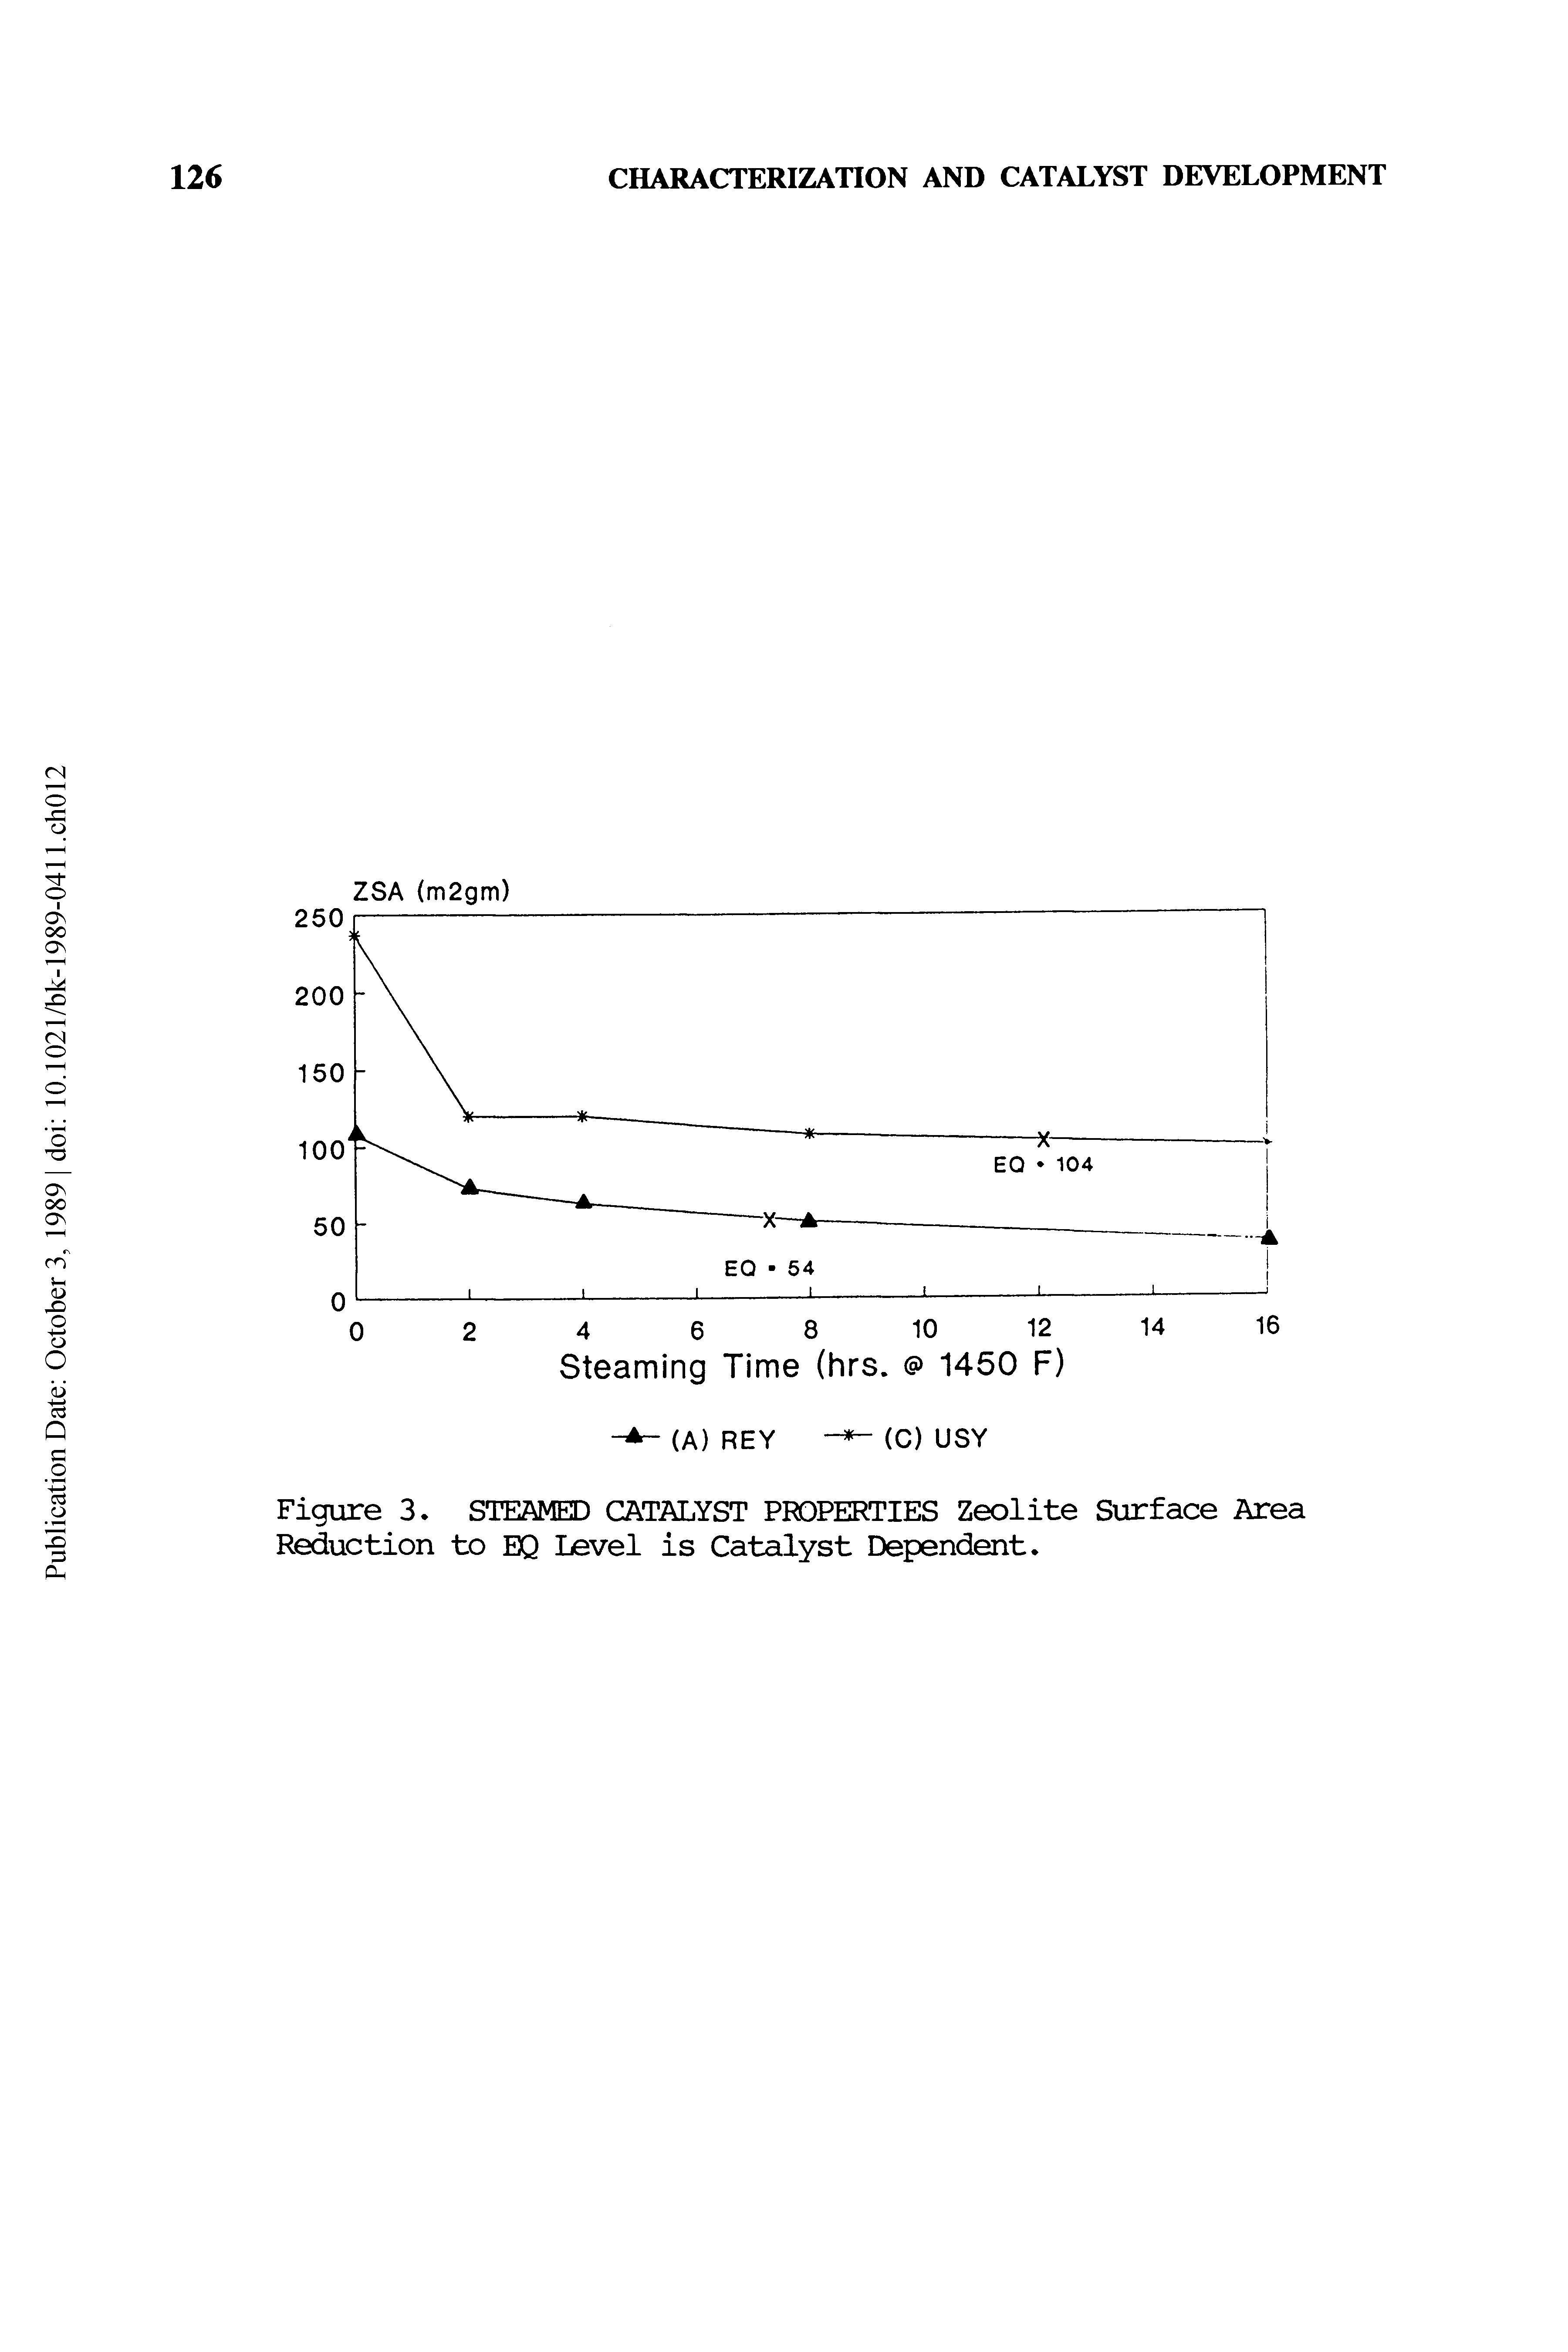 Figure 3. STEAMED CATALYST PROPERTIES Zeolite Surface Area Reduction to EQ Level is Catalyst Dependent.